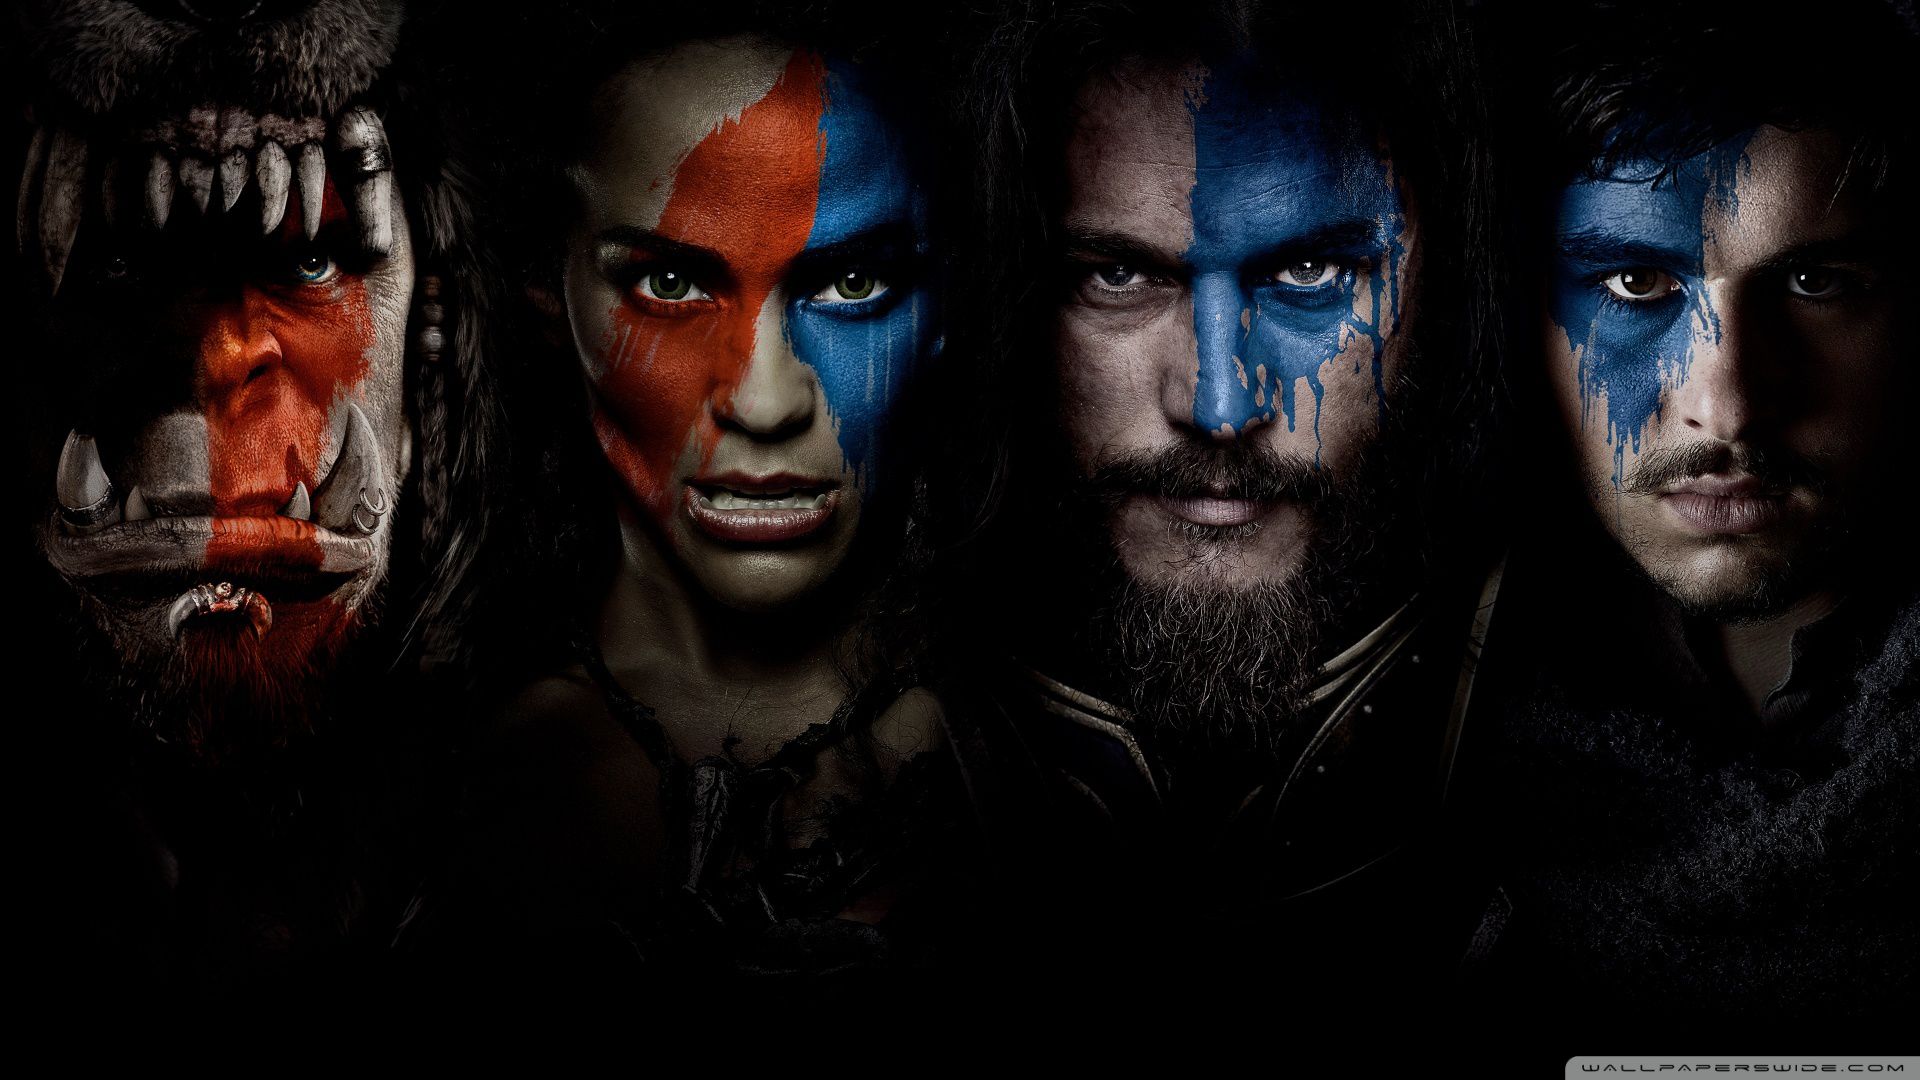 Warcraft 2016 Movie Wallpapers Full HD Free Download